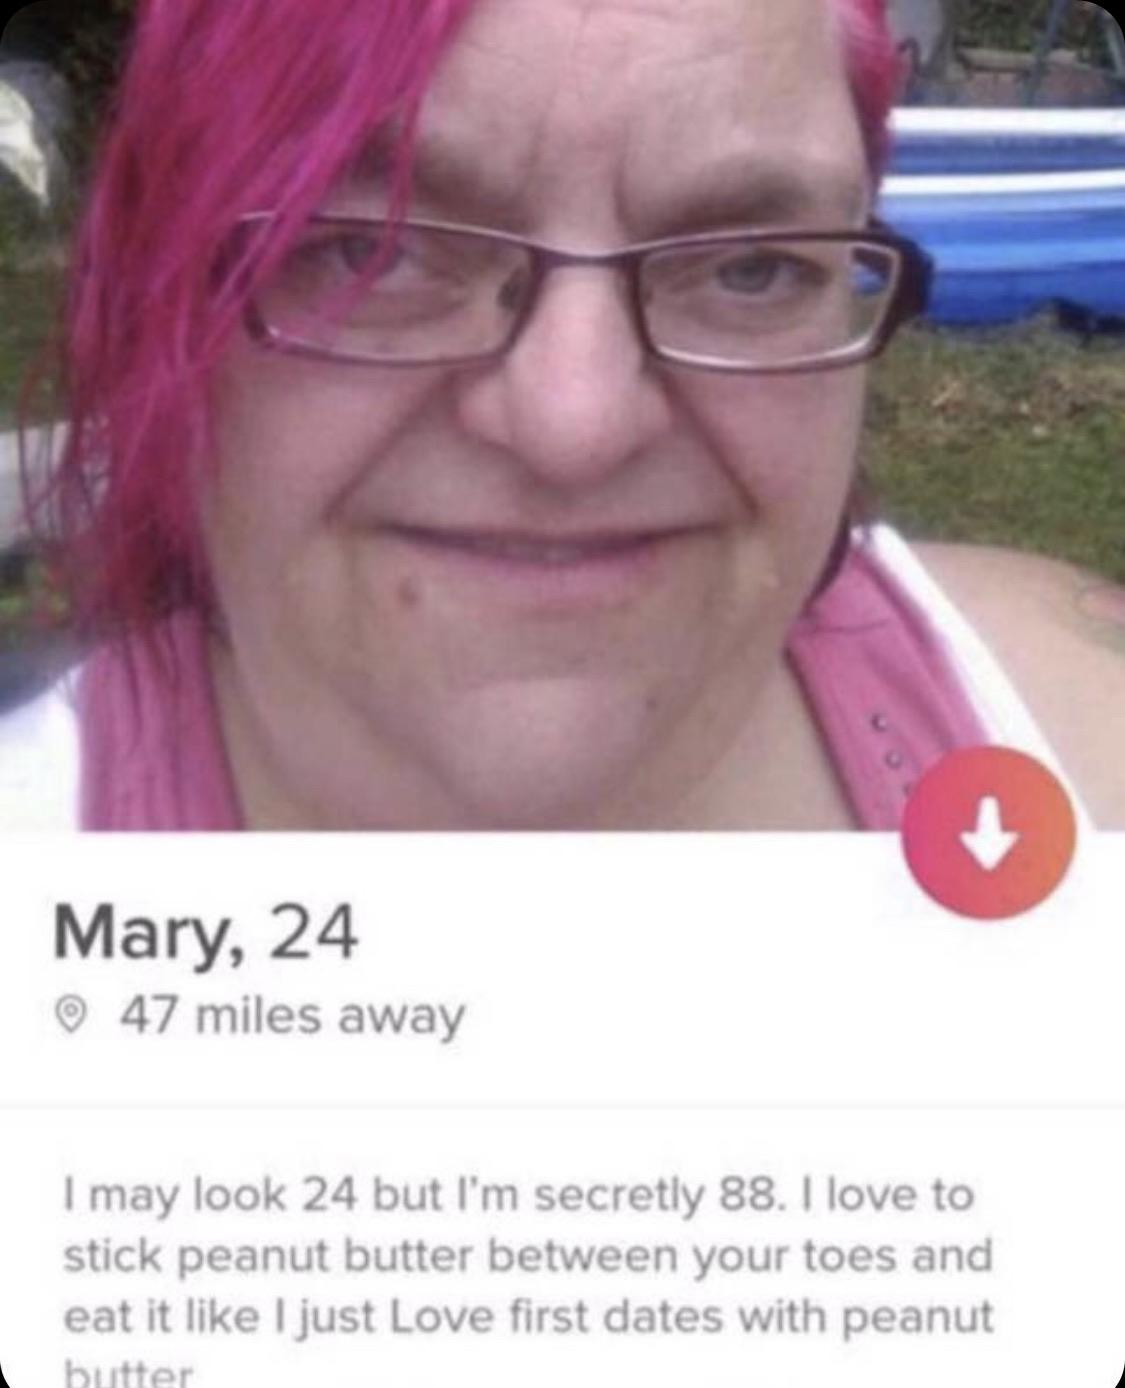 ugly pink hair - Mary, 24 47 miles away I may look 24 but I'm secretly 88. I love to stick peanut butter between your toes and eat it I just Love first dates with peanut butter